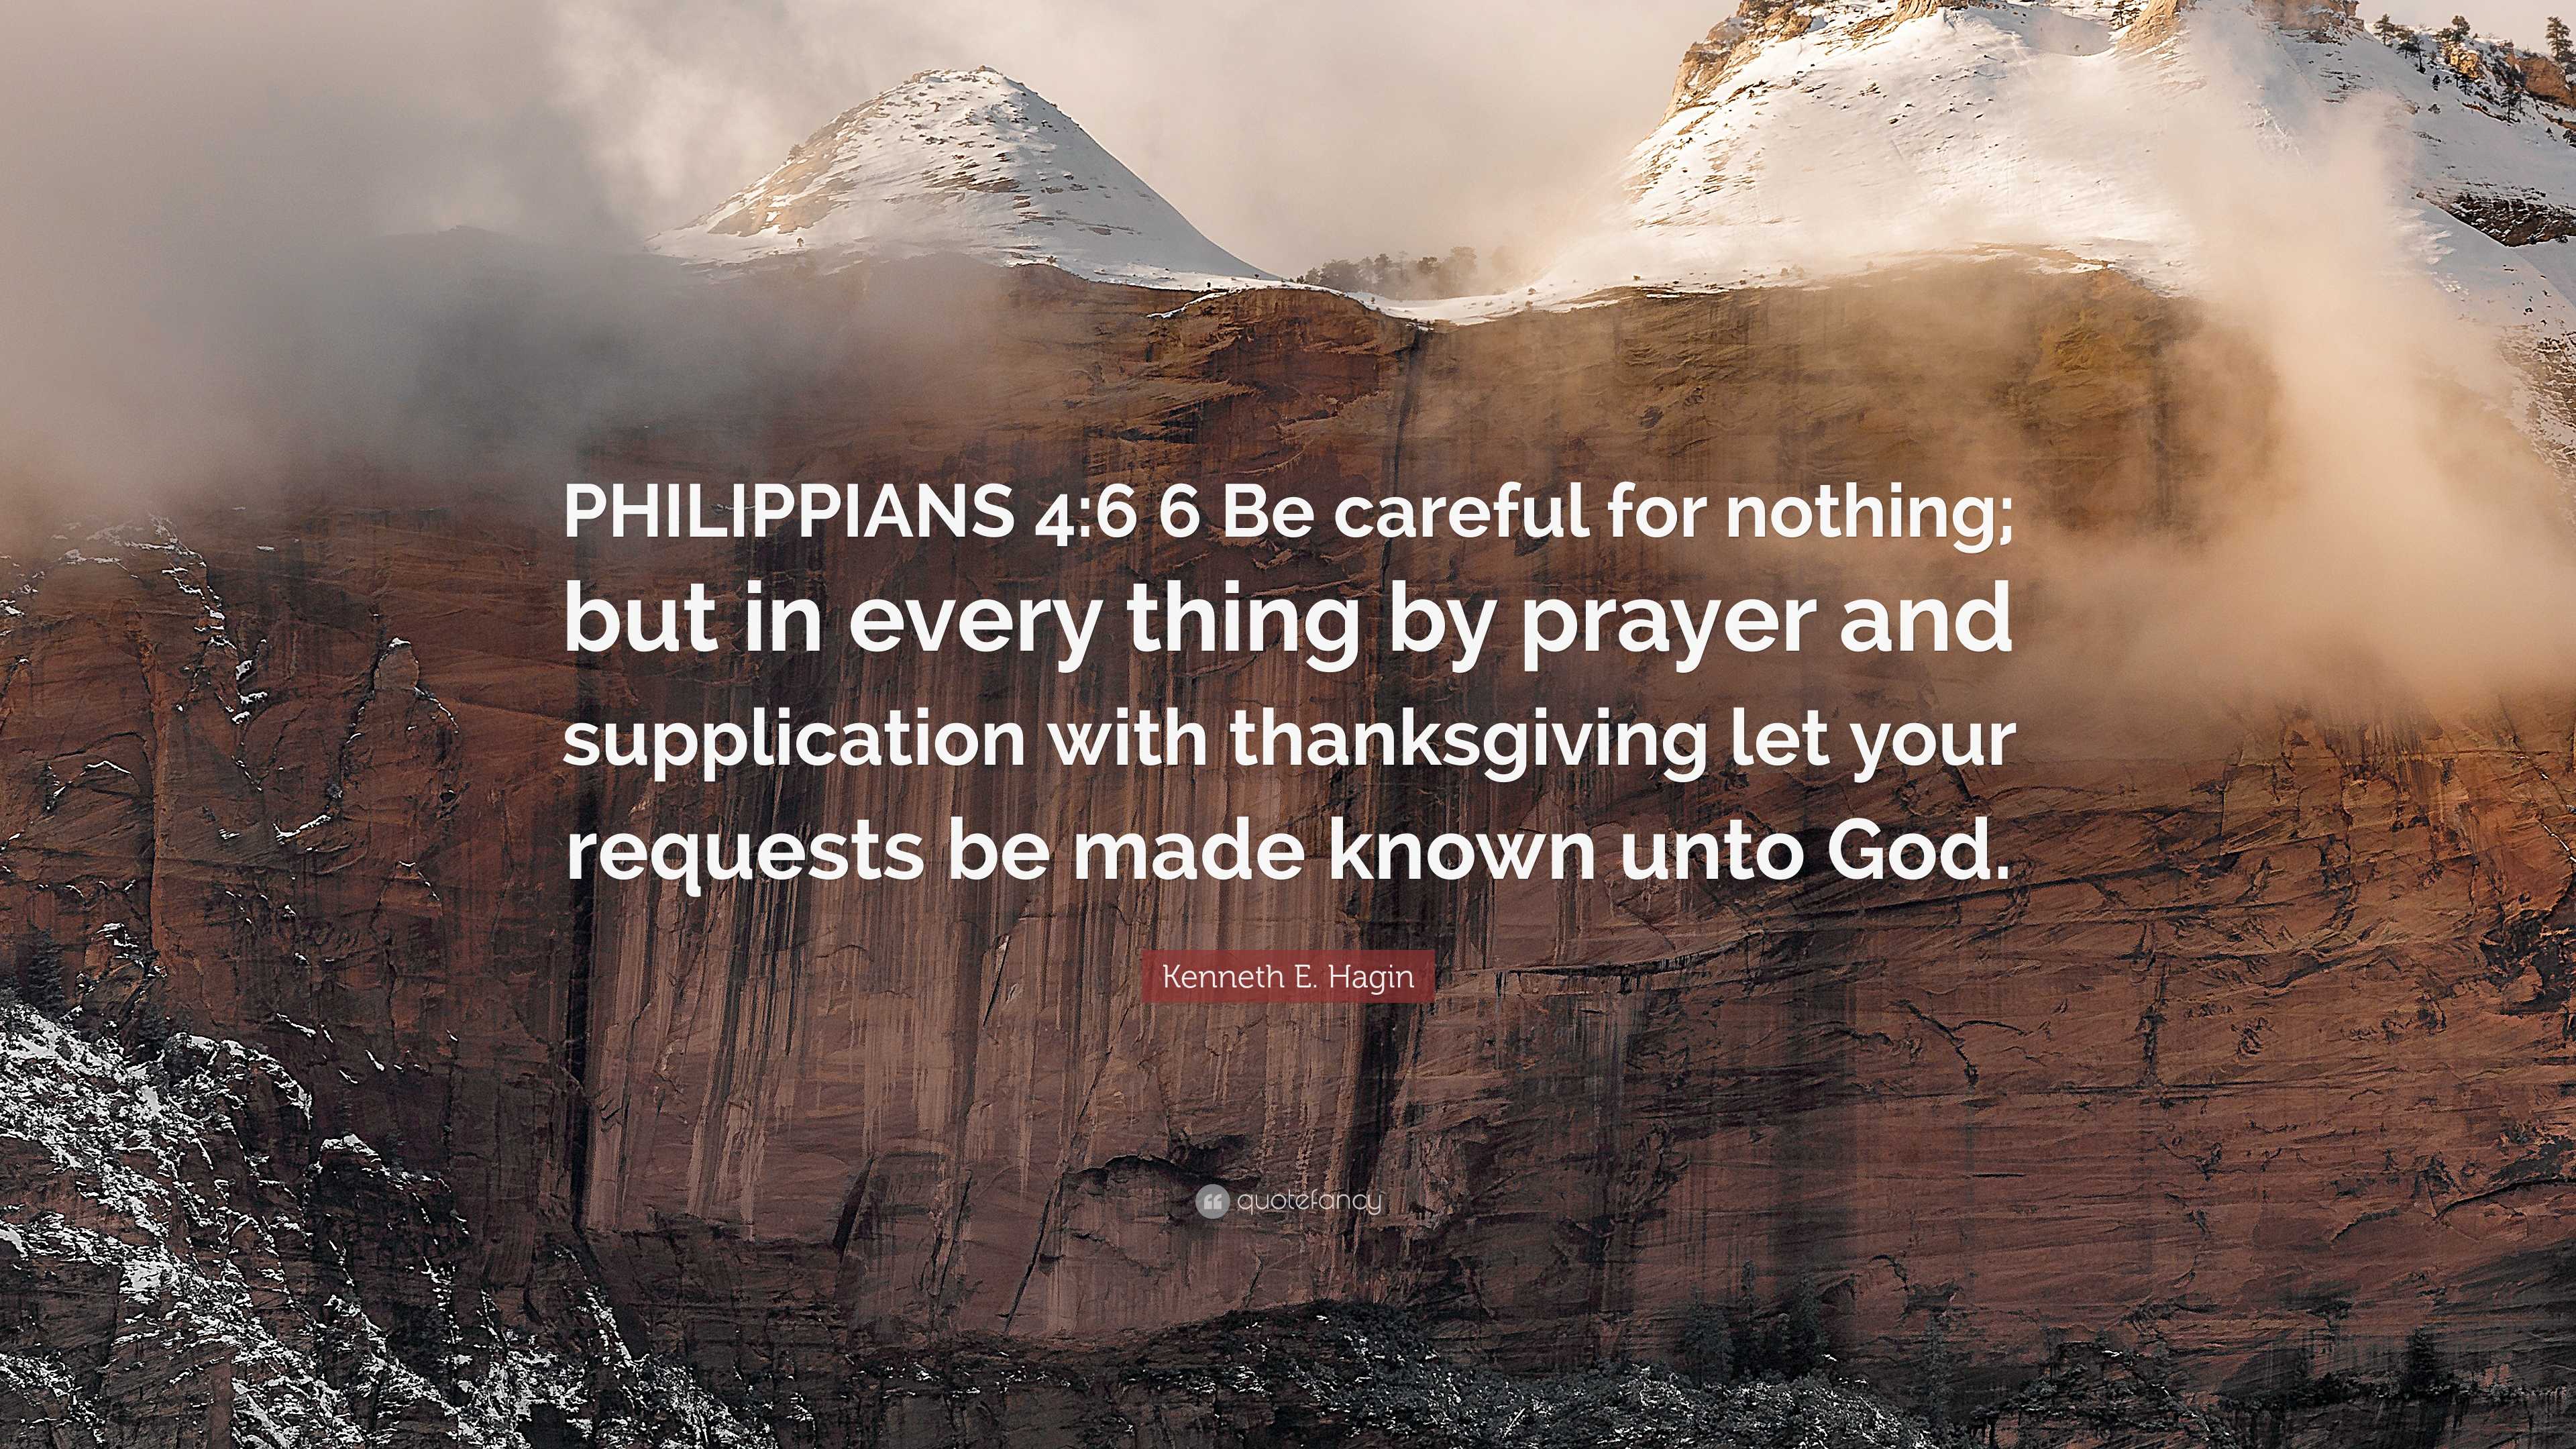 Kenneth E. Hagin Quote: “PHILIPPIANS 4:6 6 Be careful for nothing